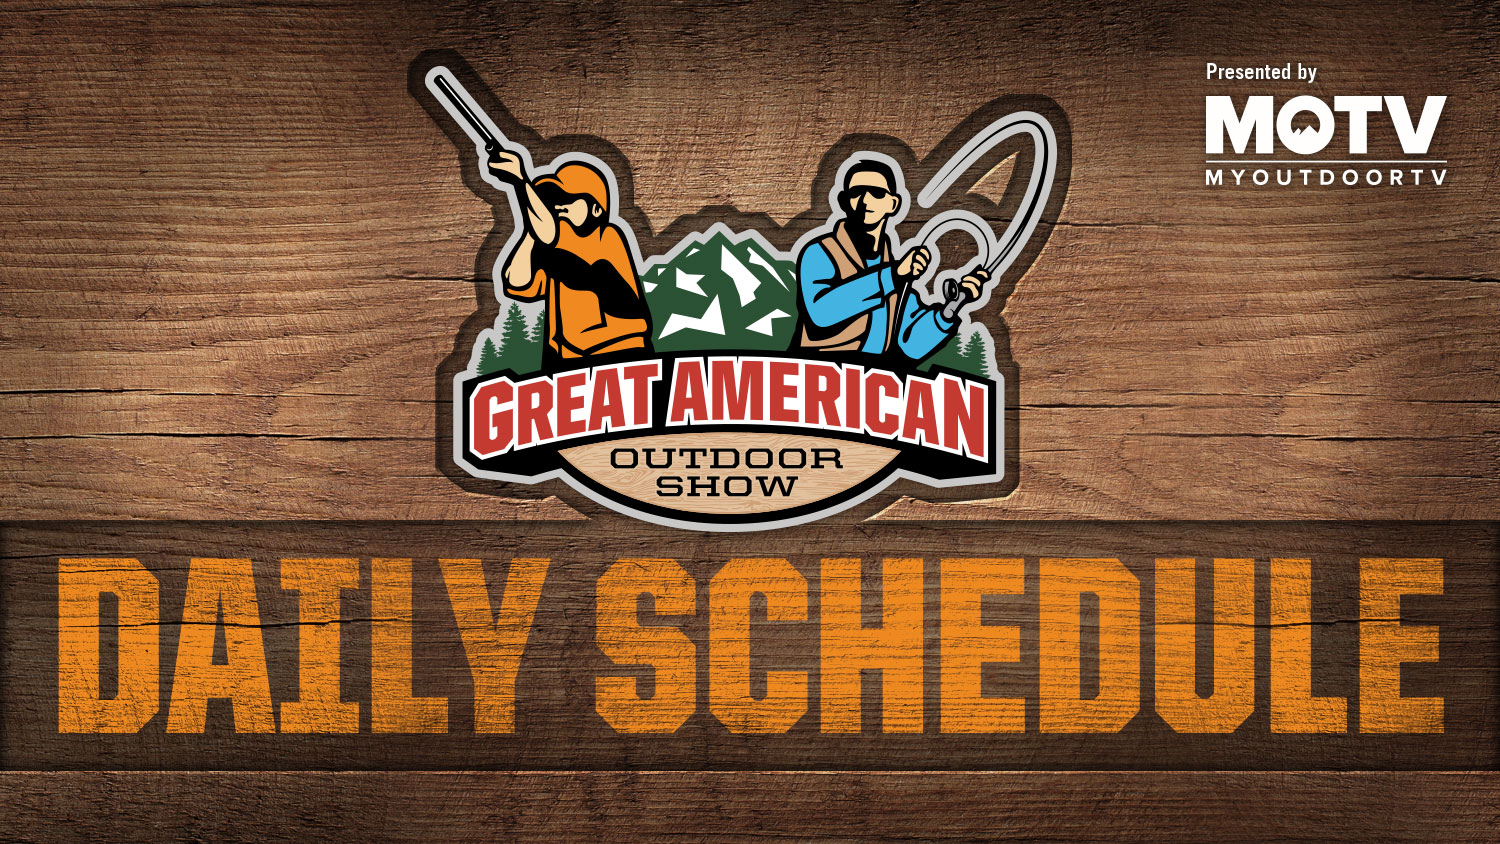 Great American Outdoor Show: Day 3 Schedule 